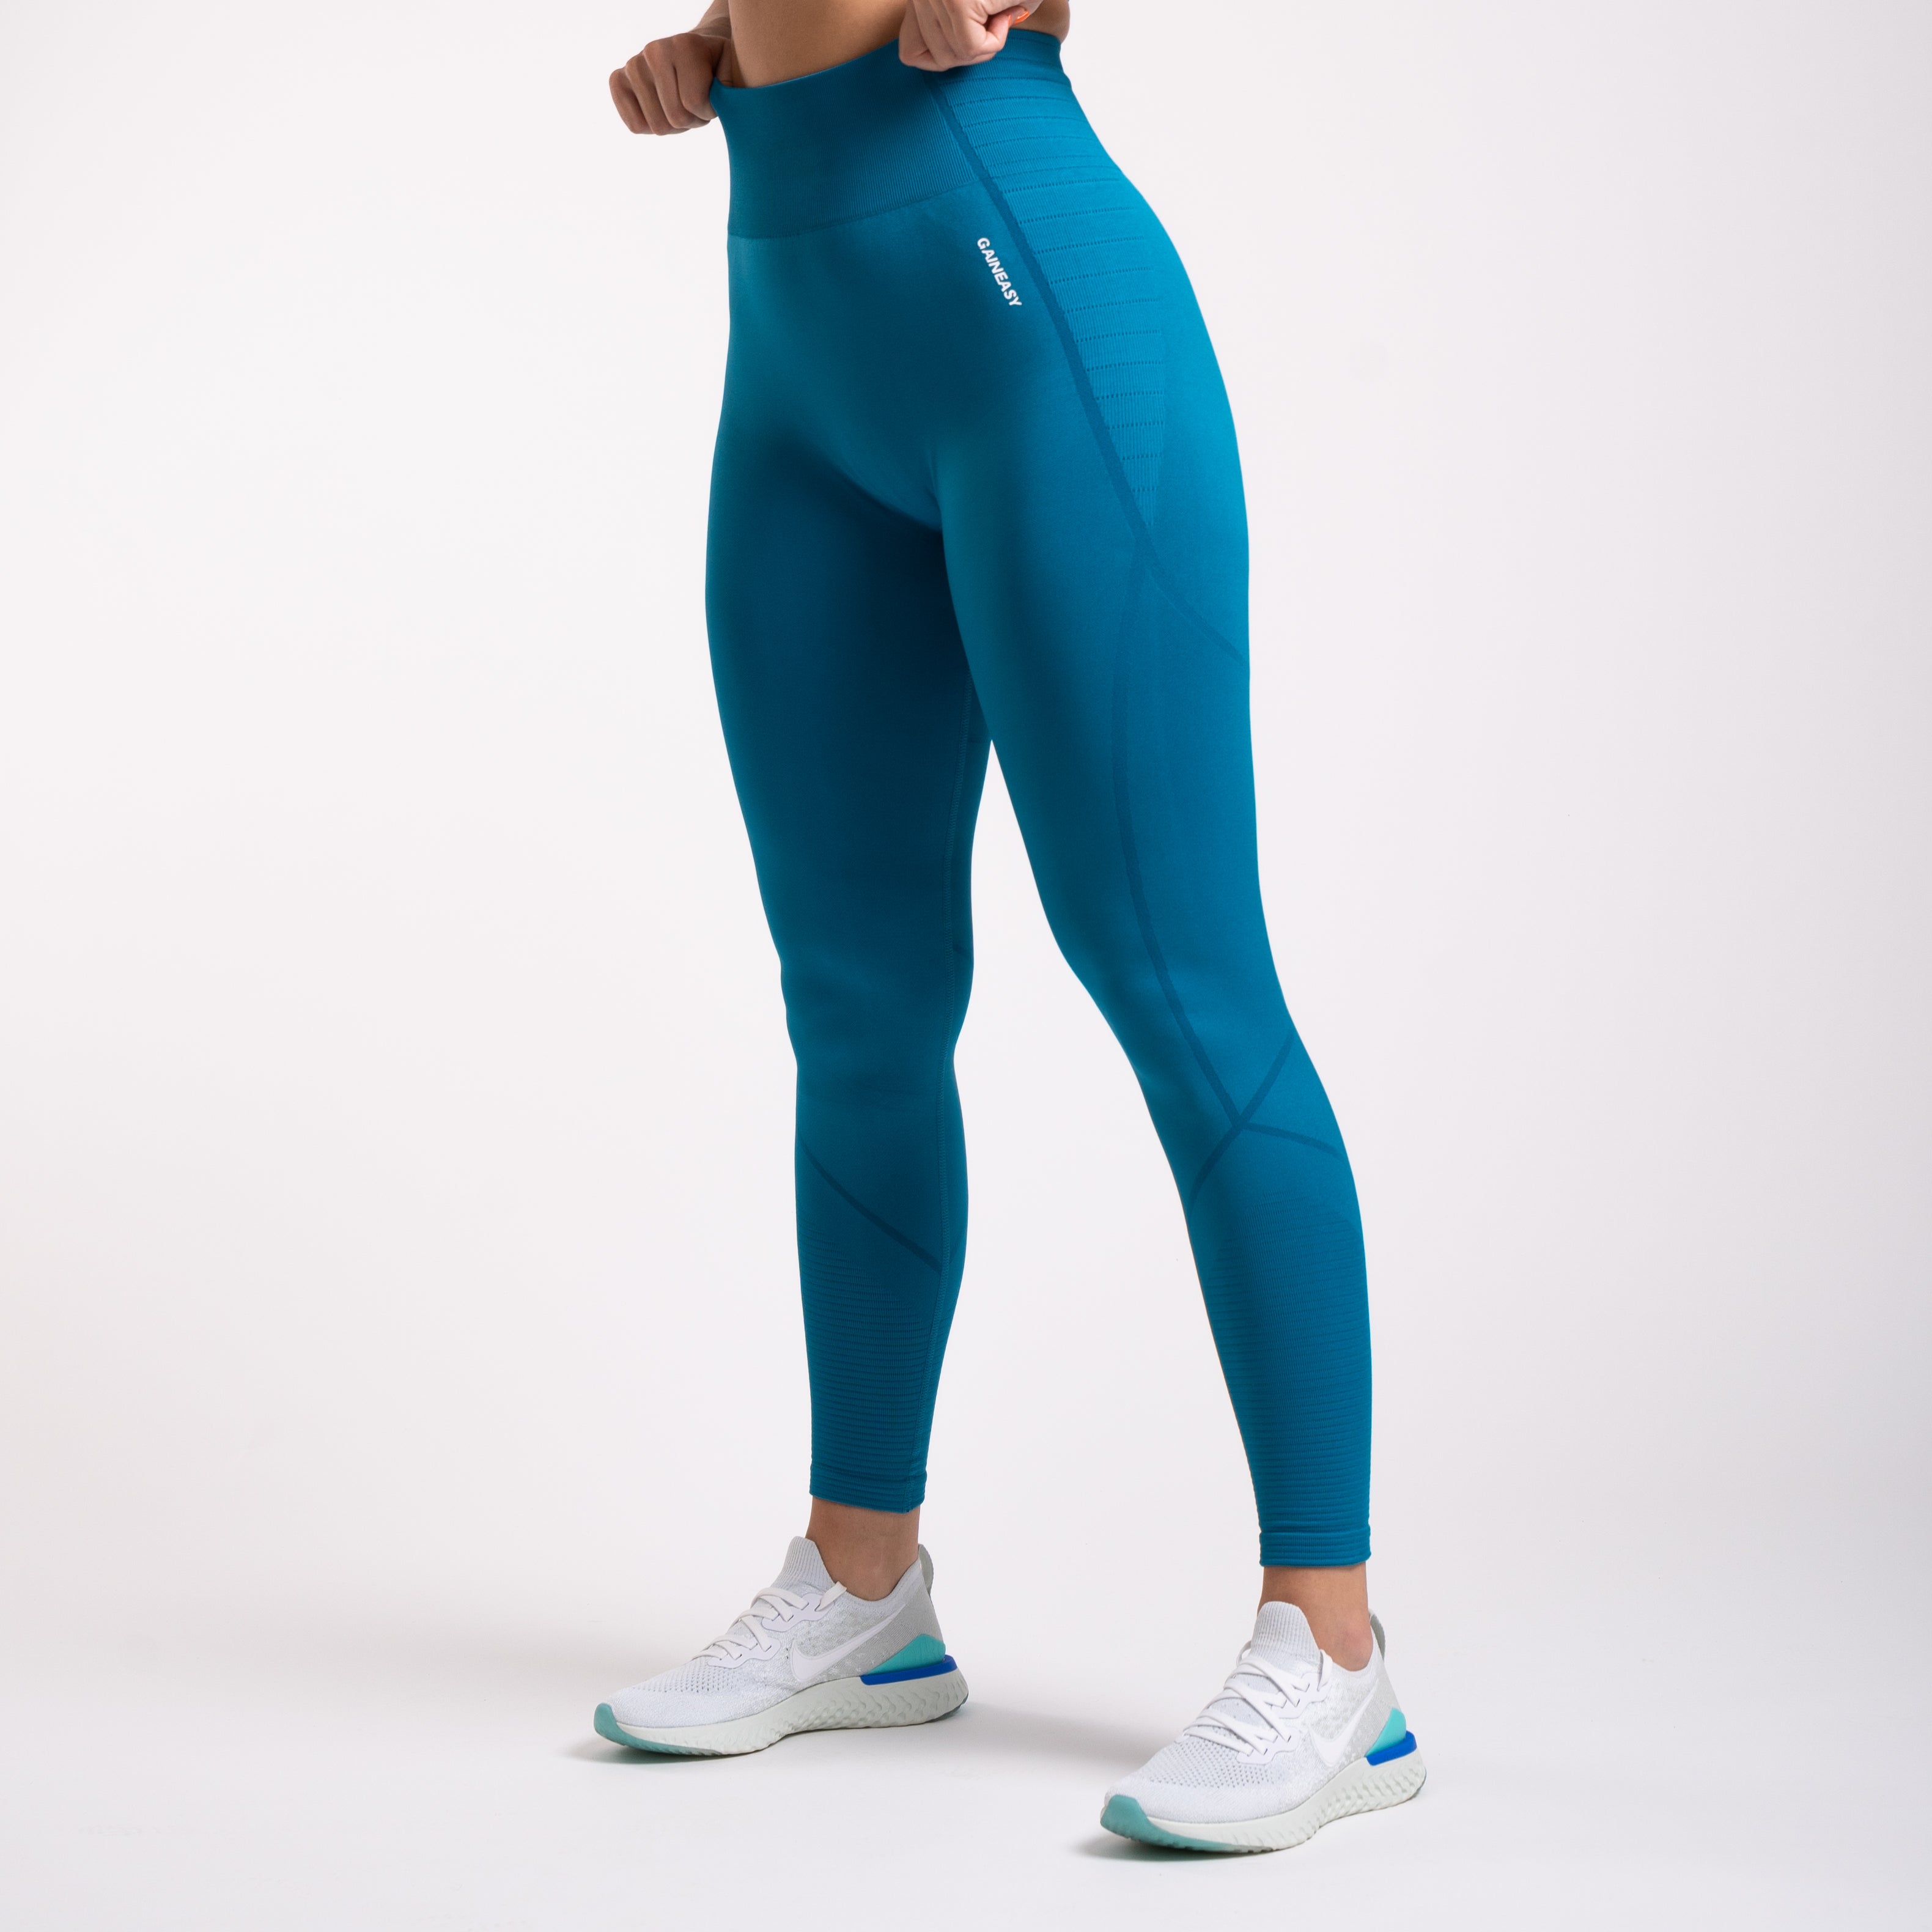 Feel Confident and Comfortable in Our Seamless Yoga Set